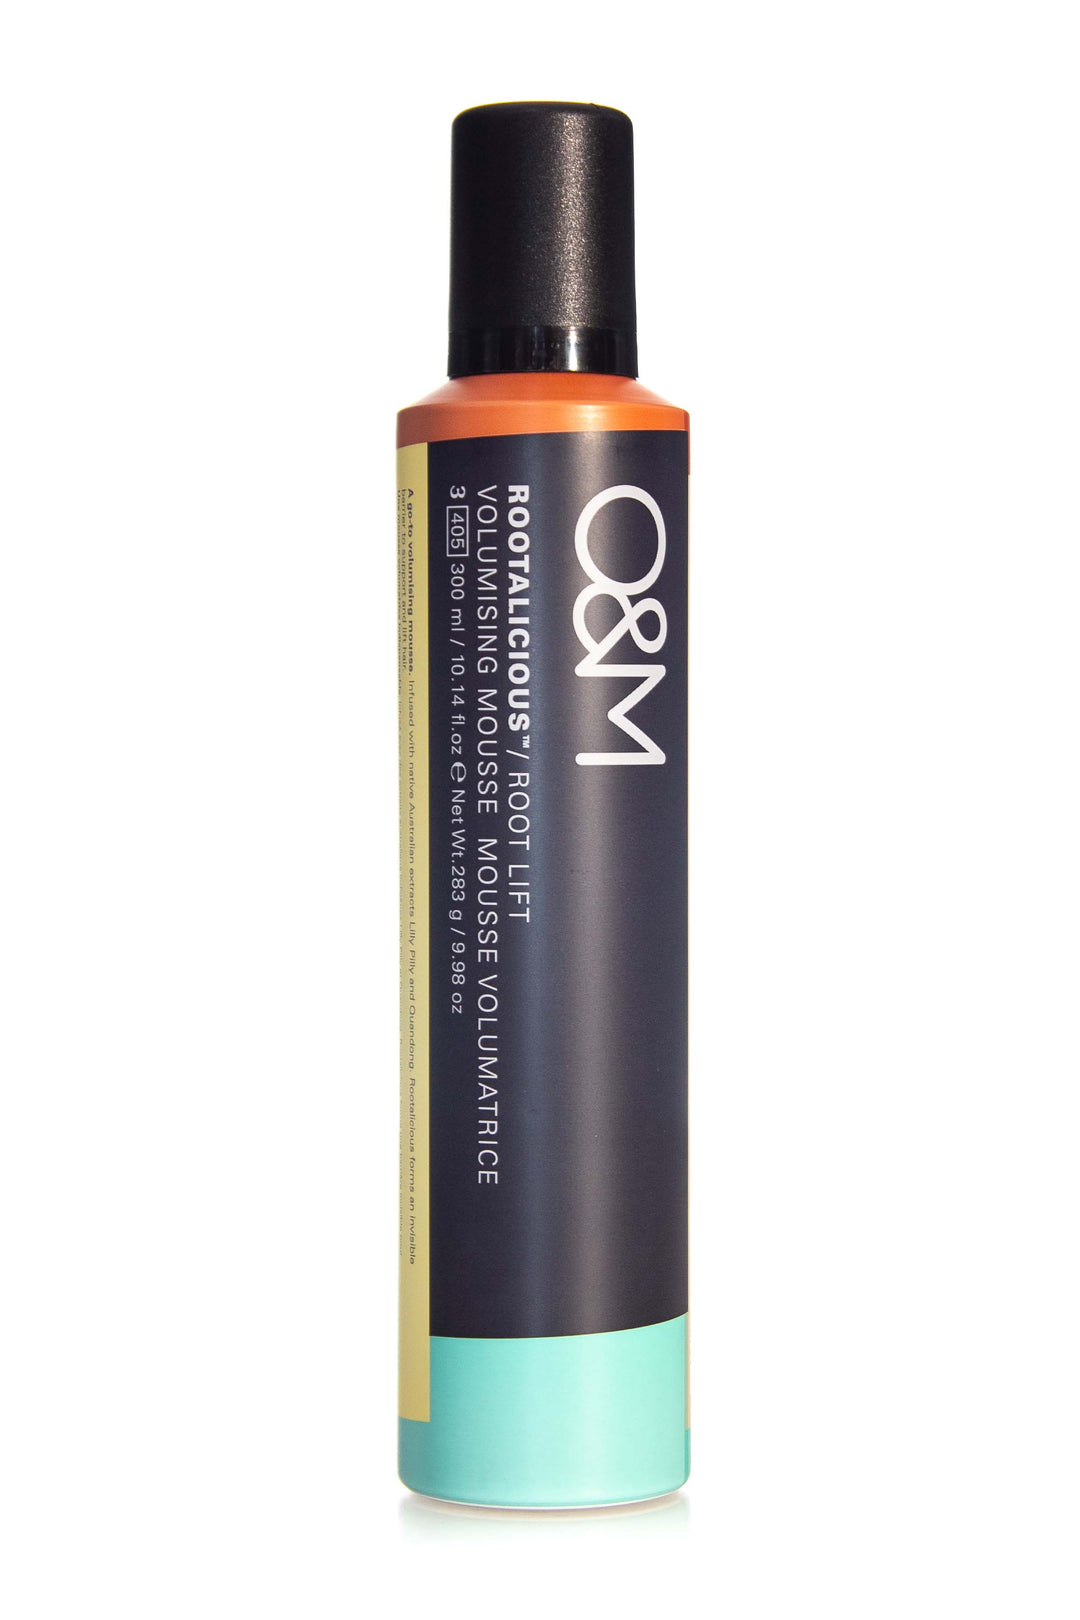 O&M ROOTALICIOUS ROOT LIFT 300ML